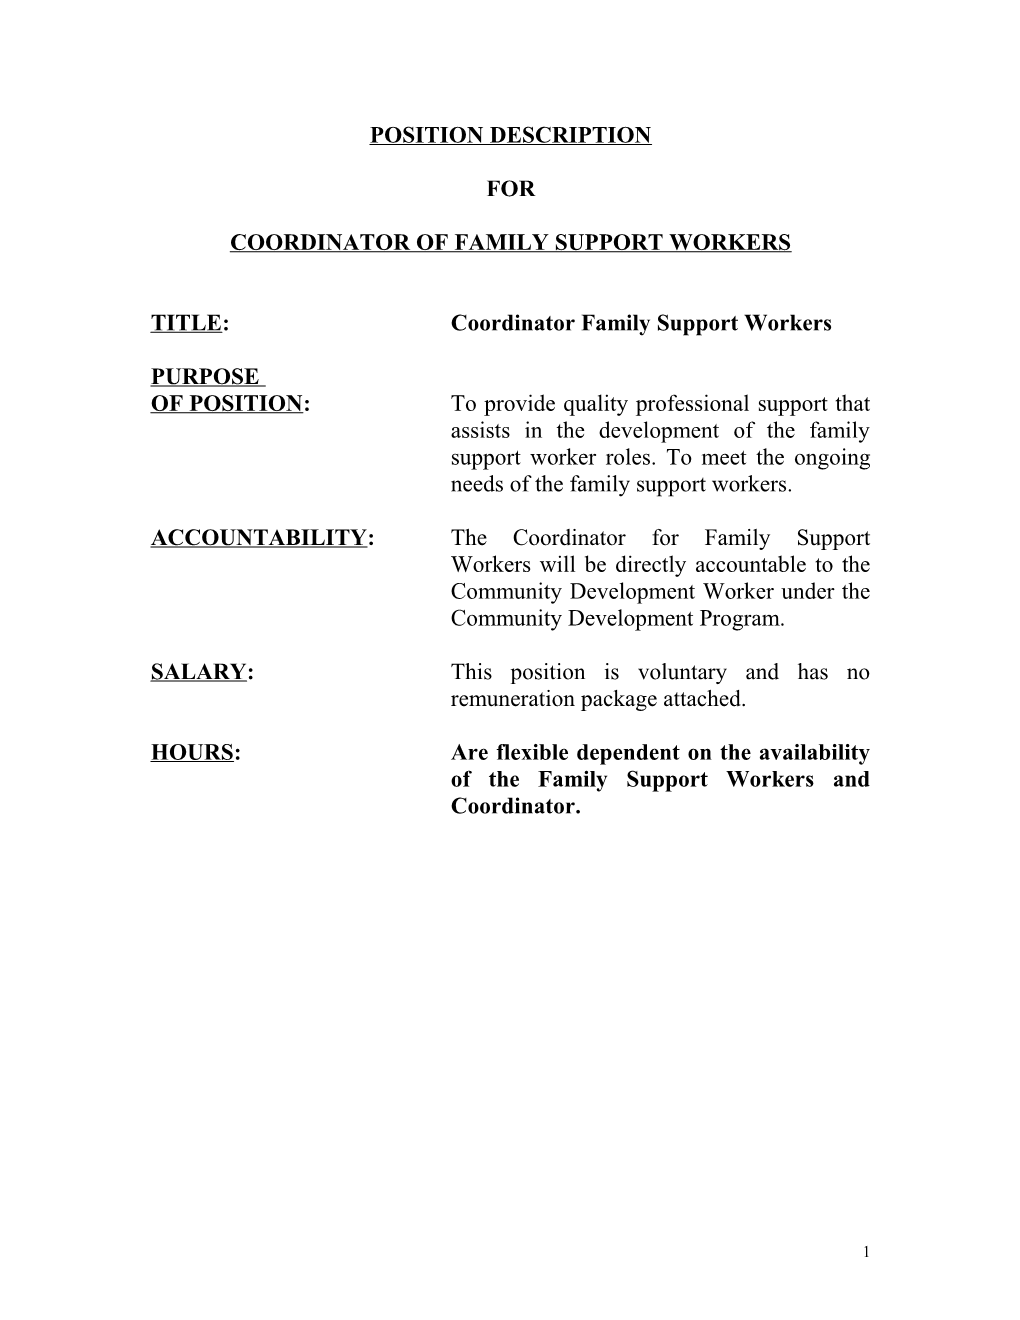 Coordinator of Family Support Workers